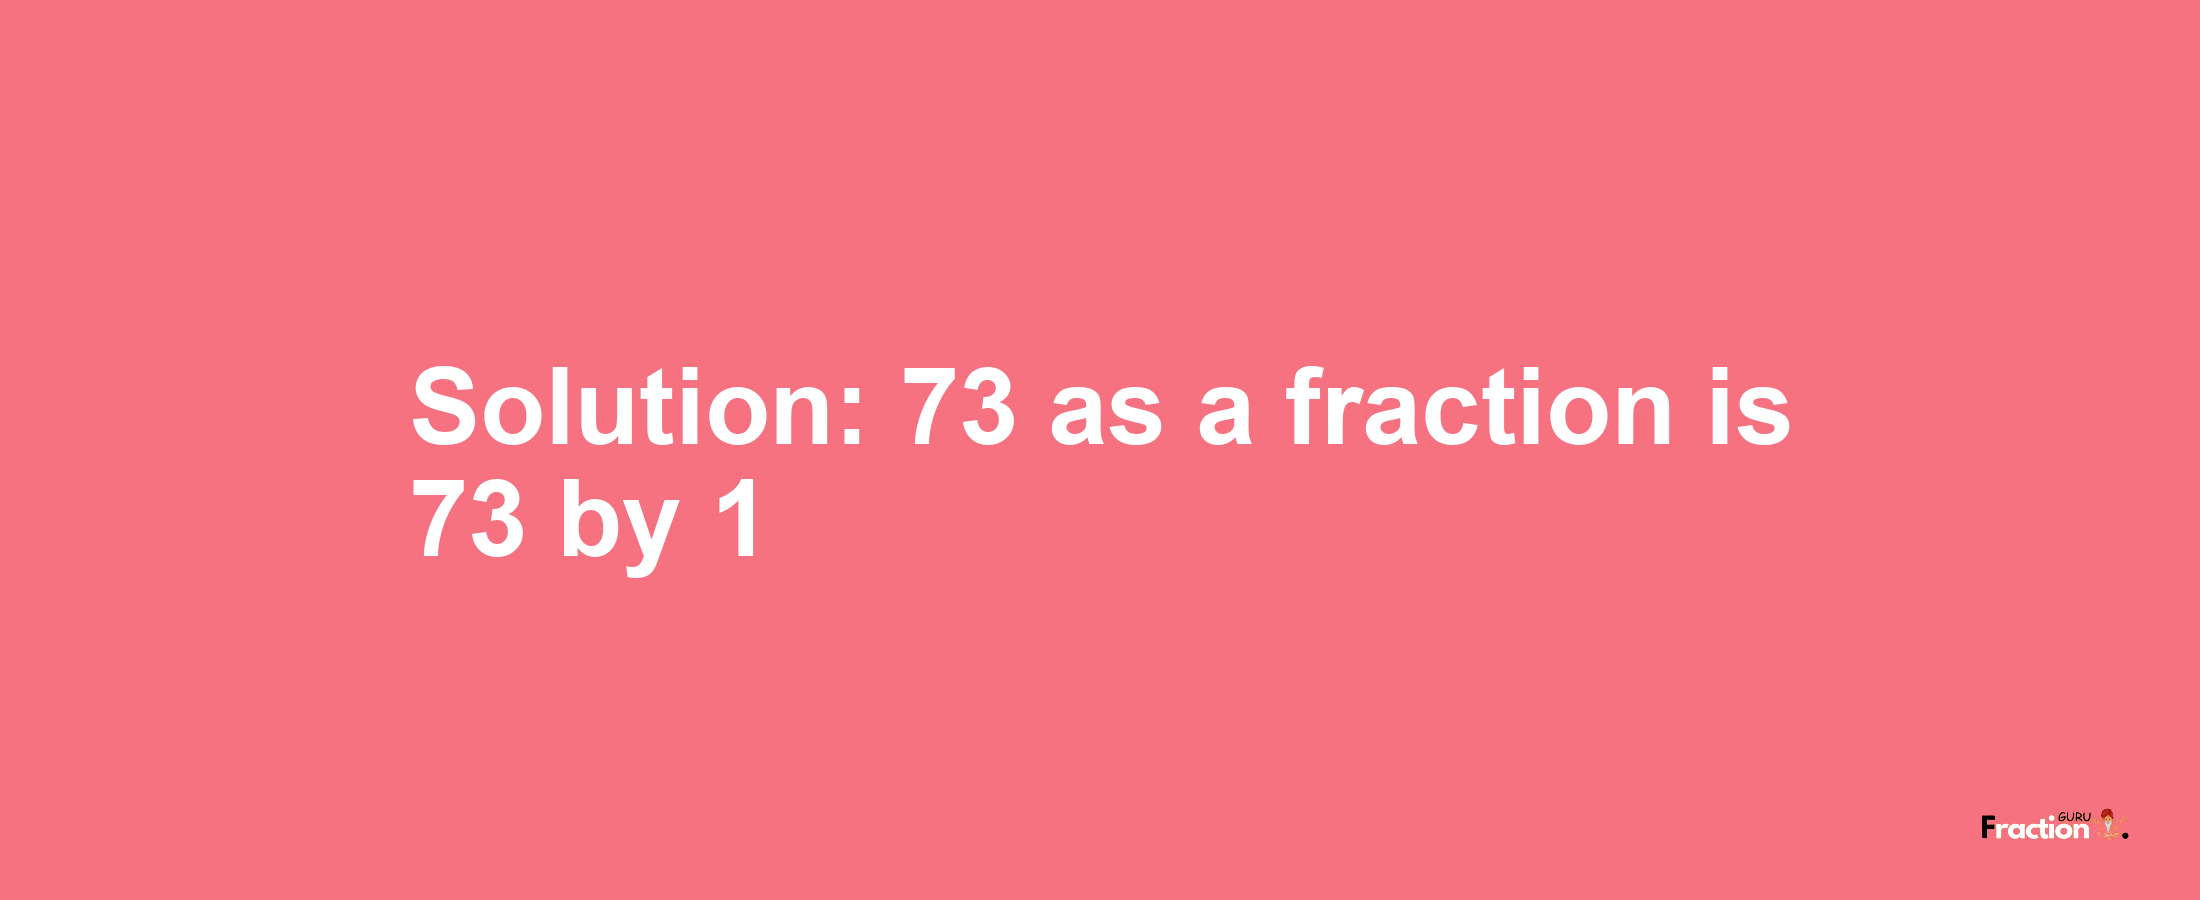 Solution:73 as a fraction is 73/1